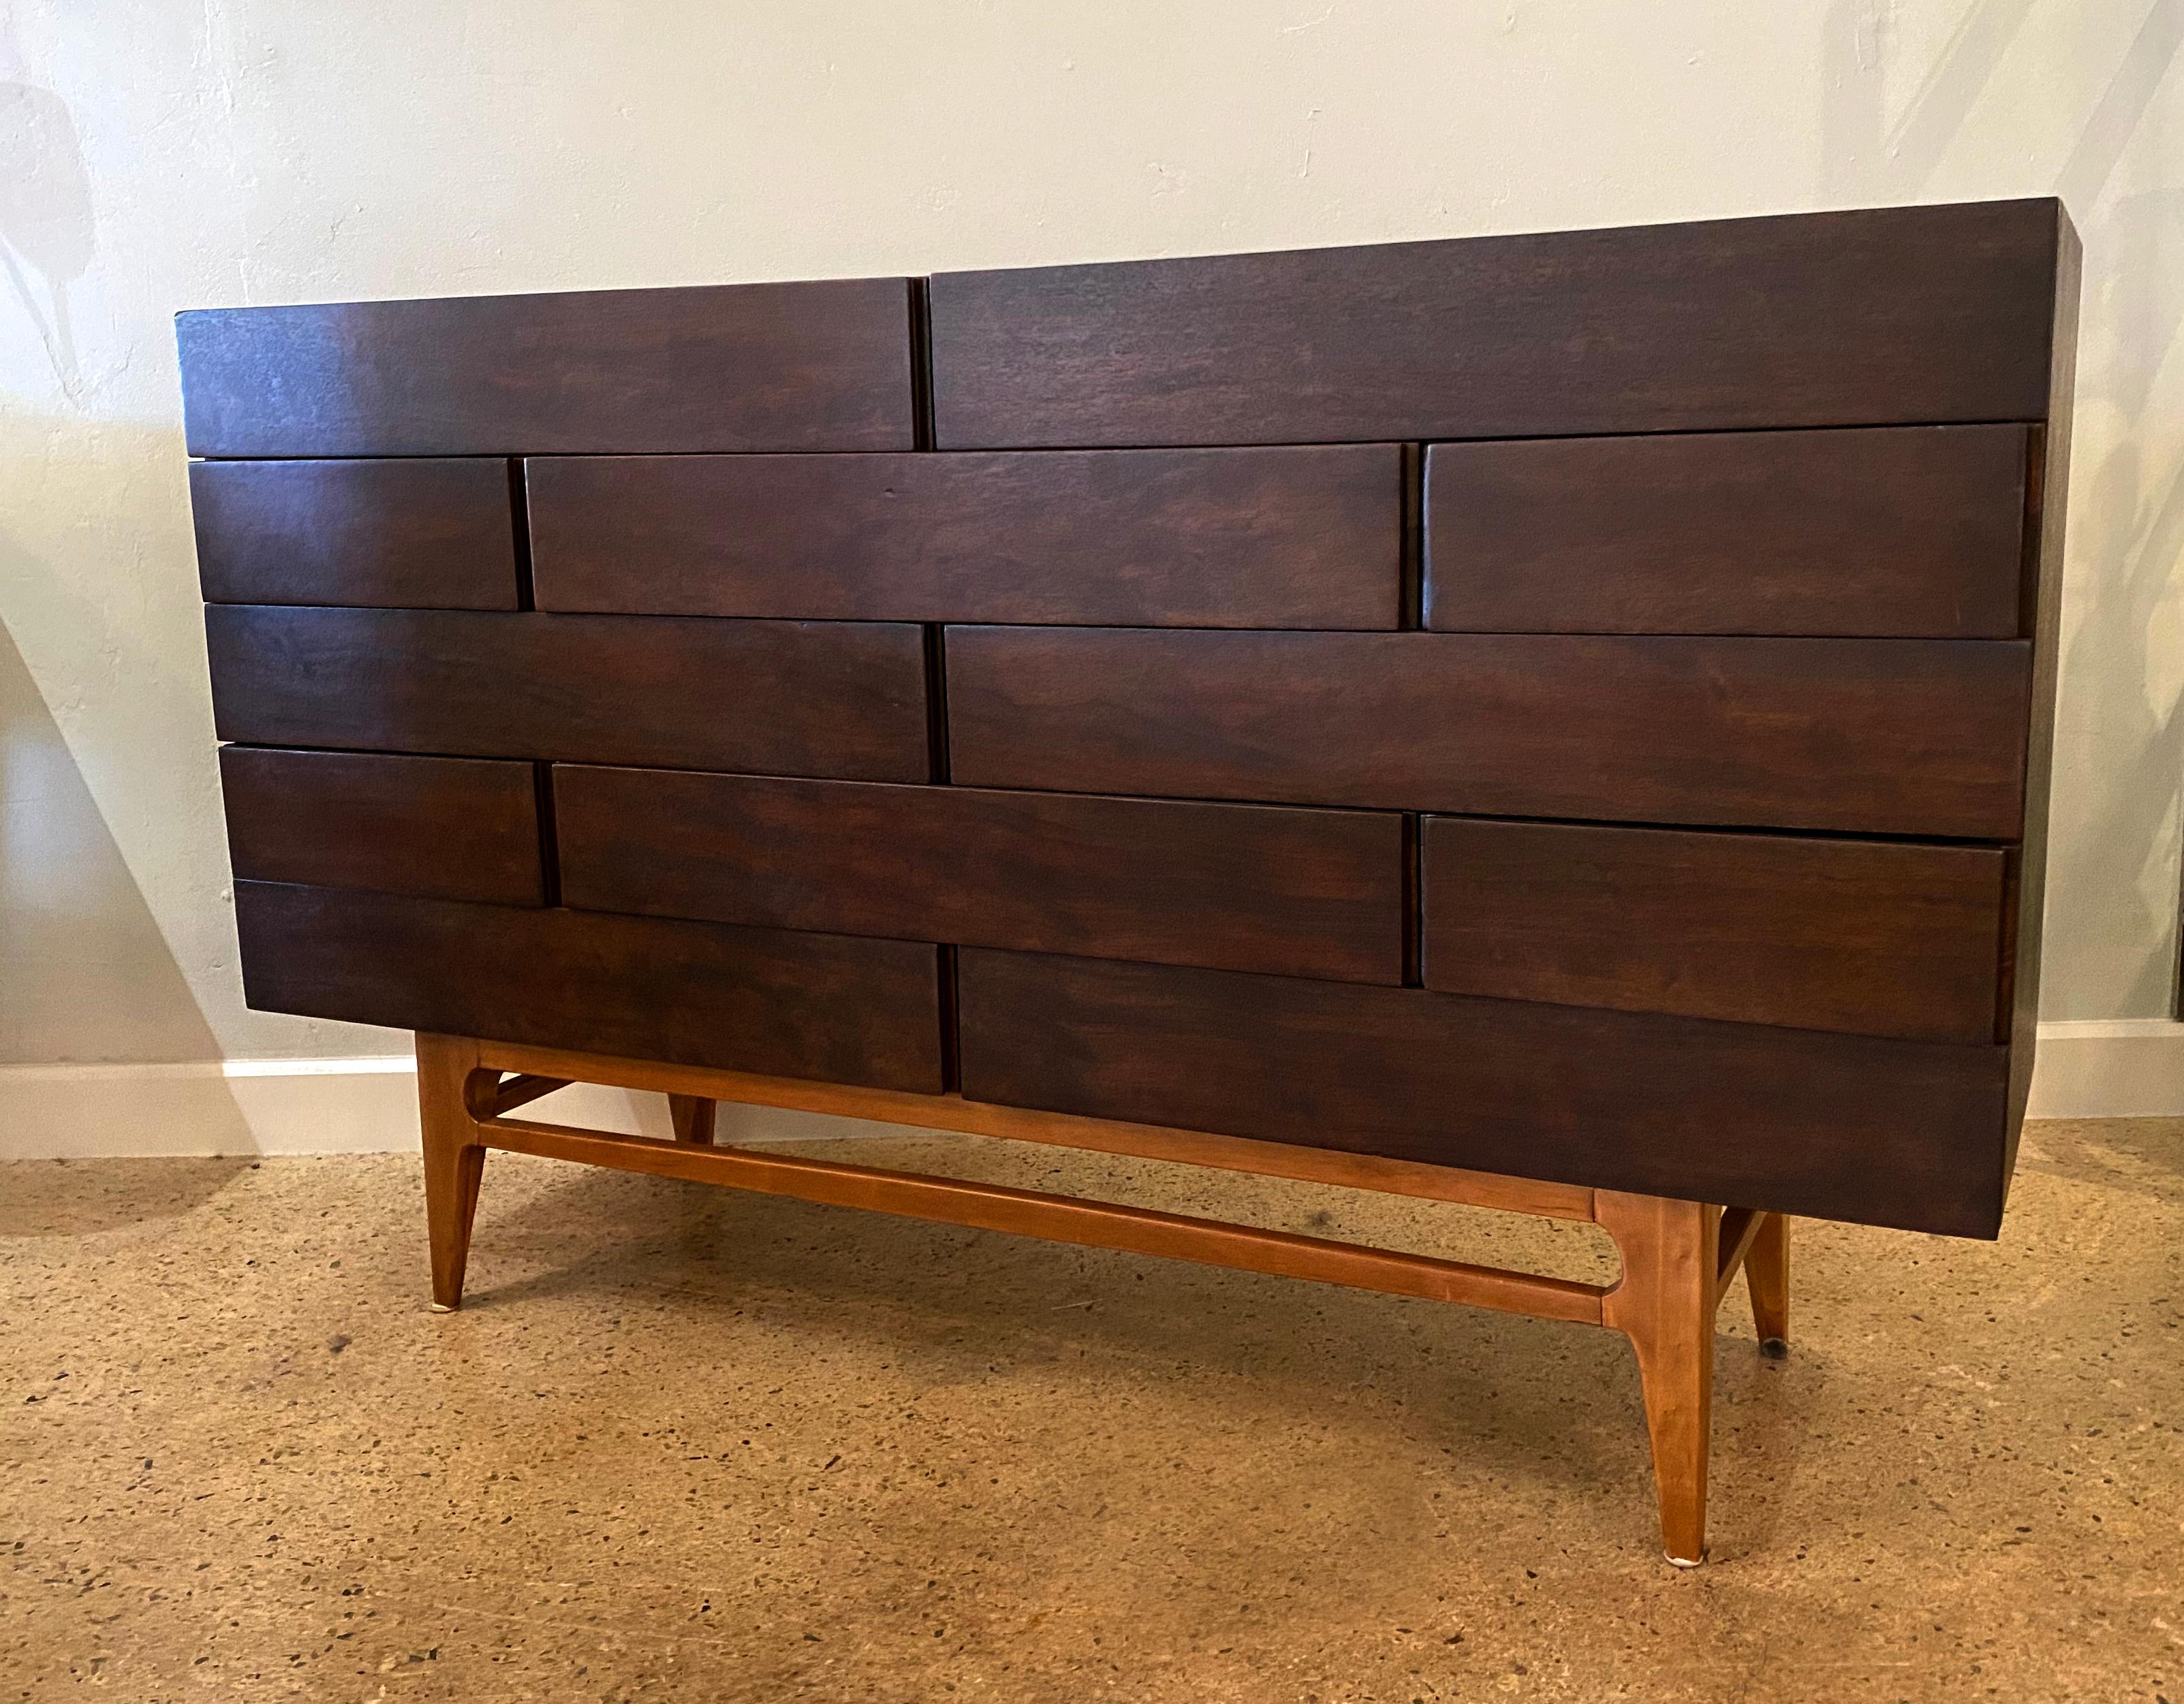 An Italian Modern 12 drawer dresser by Gio ponti For Singer & Sons... of Walnut, rectangular in shape, with alternating composition. Sitting upon a fruitwood base with splayed legs

Reference wright auction: Important Italian Design, May 23, 2006,